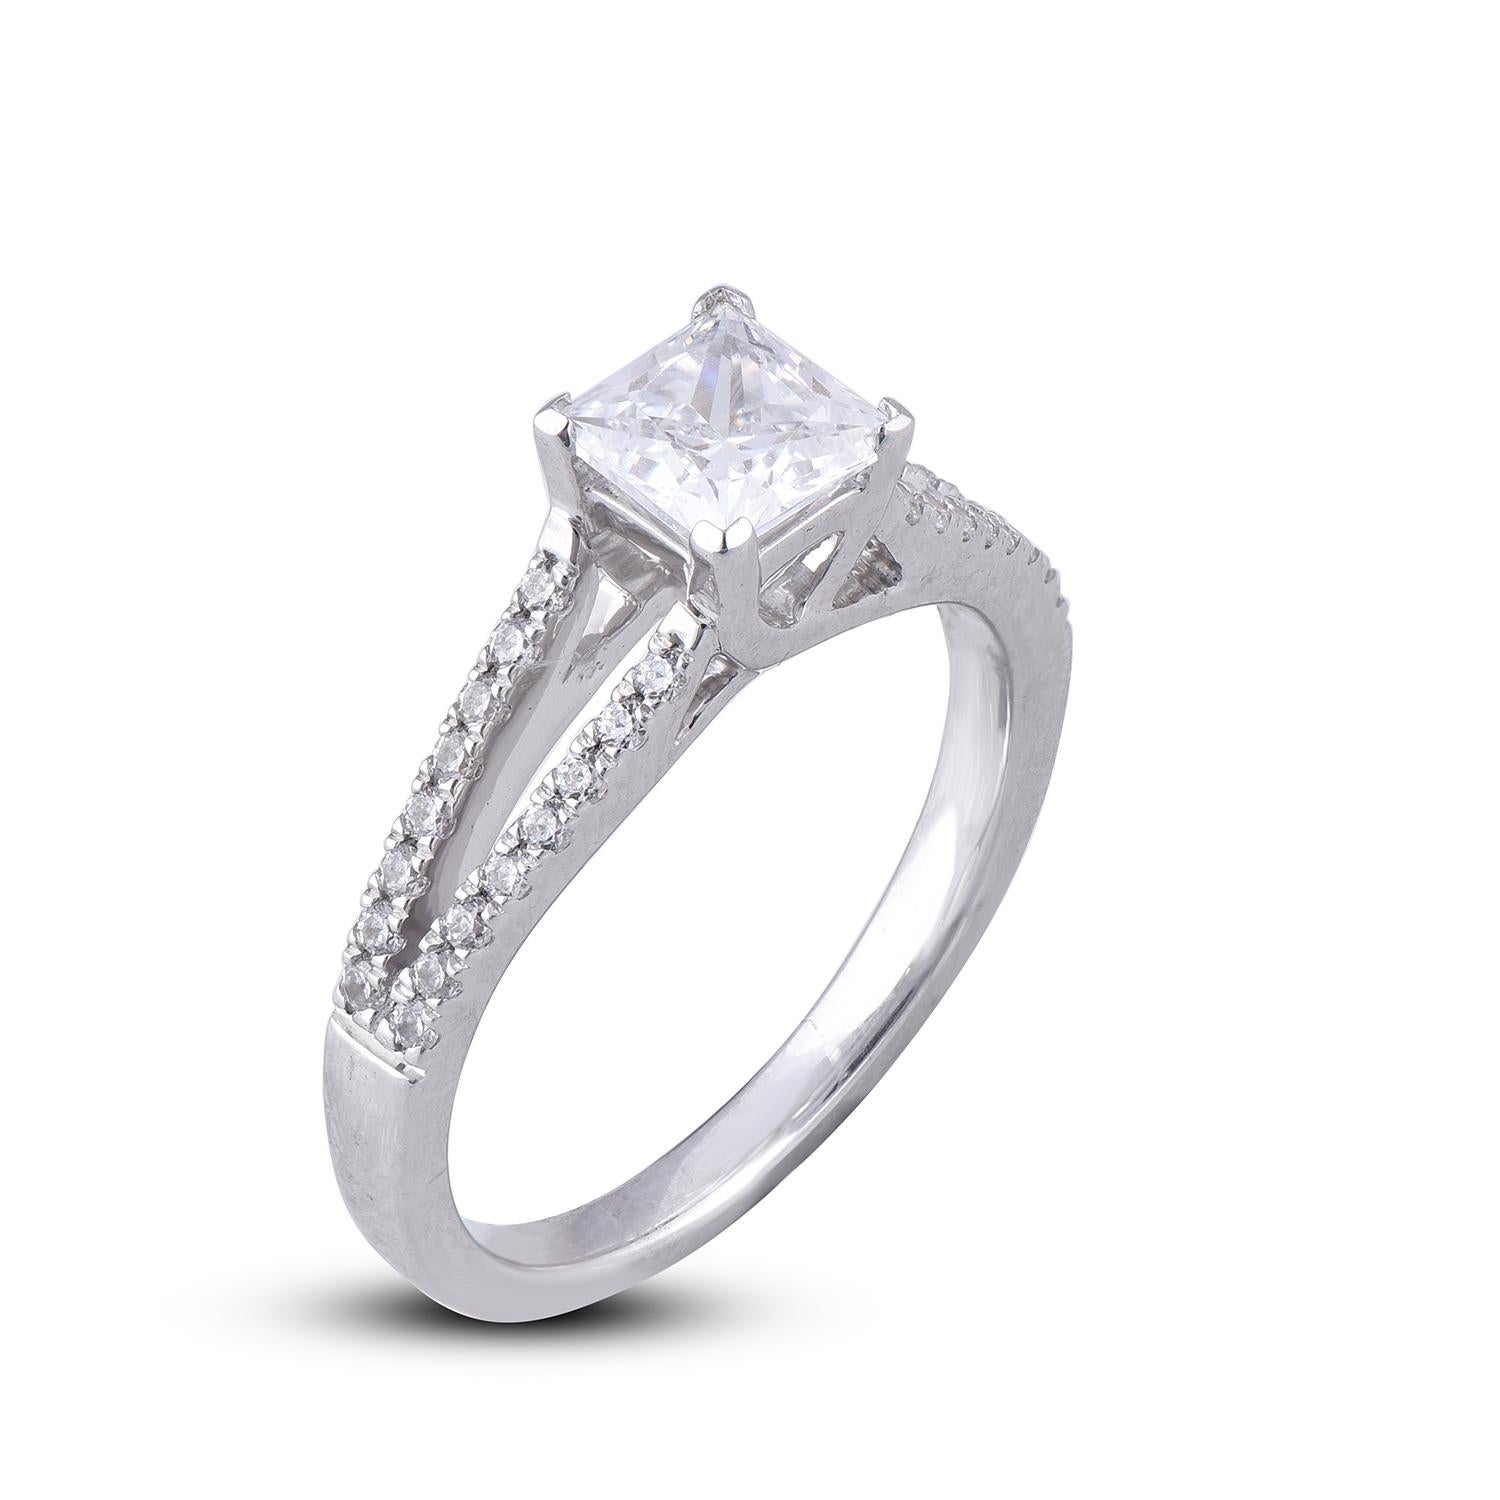 Simply stunning engagement ring features 0.75 ct centre stone and 0.25 ct diamond frame and split shank lined diamonds. This ring is handcrafted in 18 kt white gold and embellished with 79 brilliant round diamond set in prong and micro-pave setting.